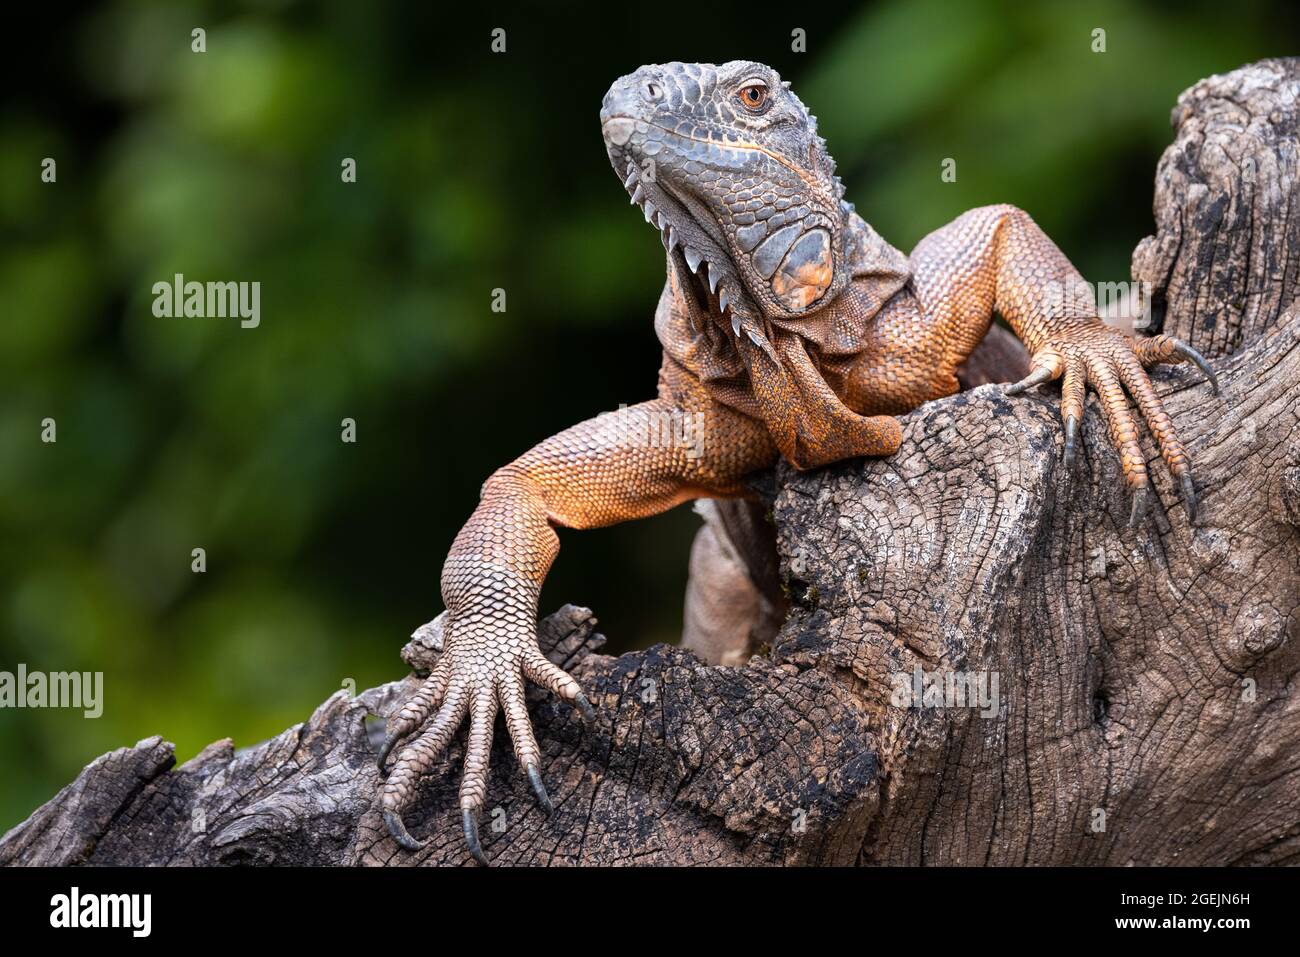 Front close up portrait of a green iguana with orange skin climbing on a tree trunk Stock Photo